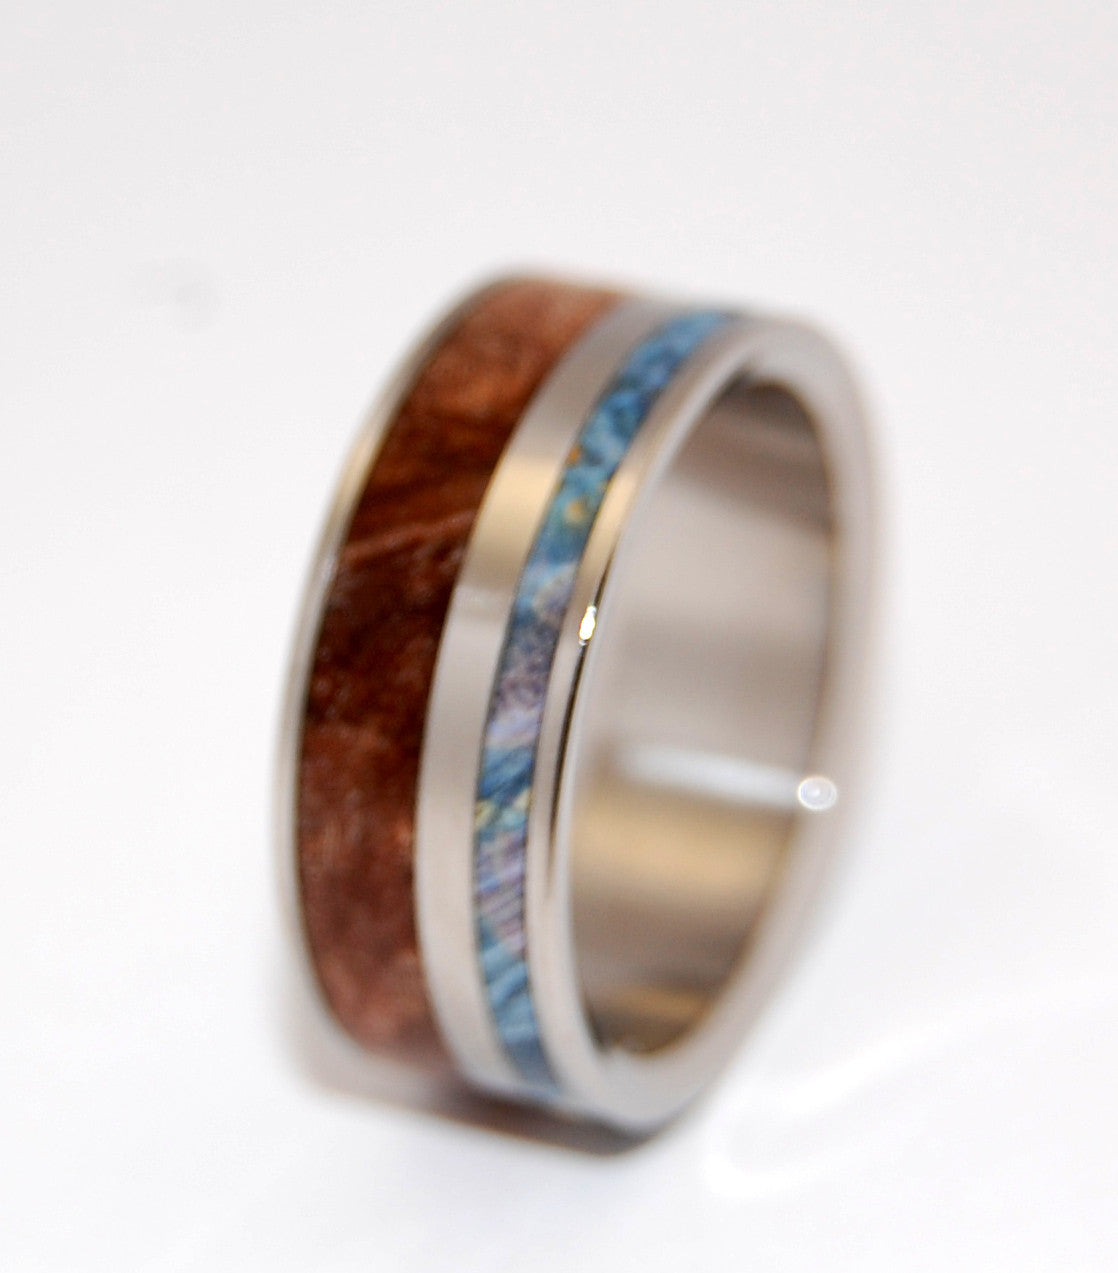 EARTH BY WATER | Maple Wood & Blue Wood Wedding Rings - Unique Wedding Rings - Minter and Richter Designs